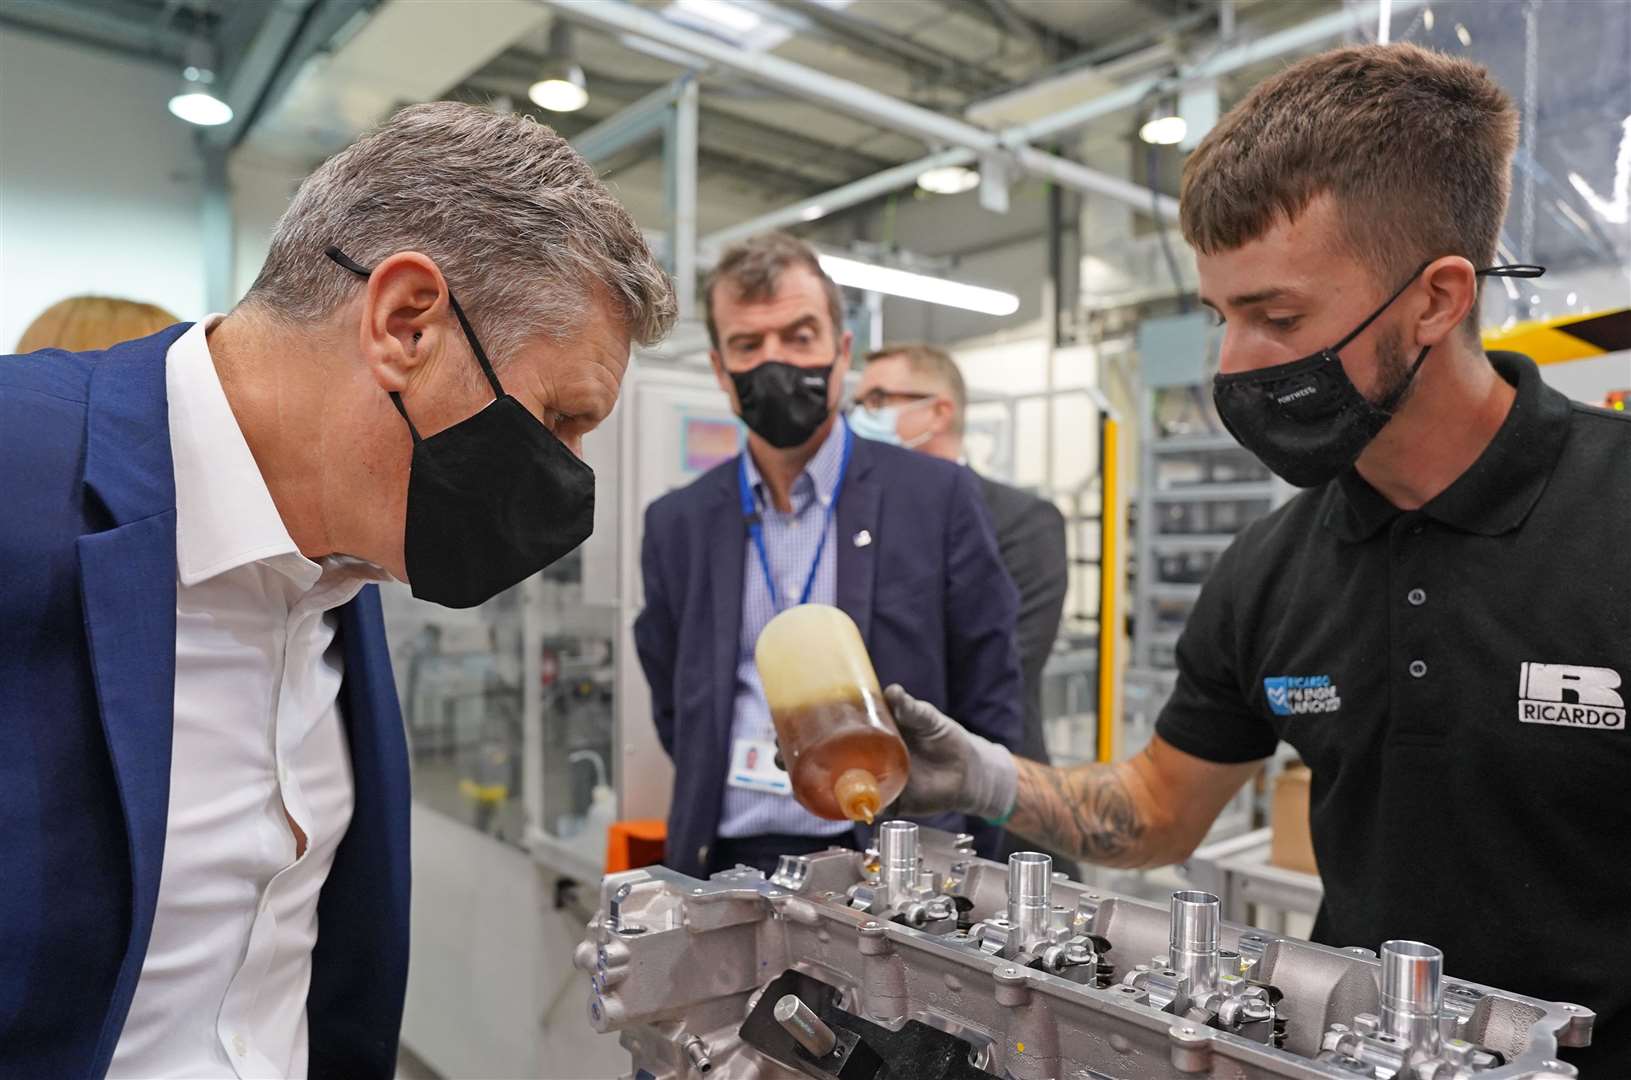 Sir Keir Starmer during a visit to engineering firm Ricardo in Shoreham-by-Sea, West Sussex, ahead of the Labour Party conference (Stefan Rousseau/PA)